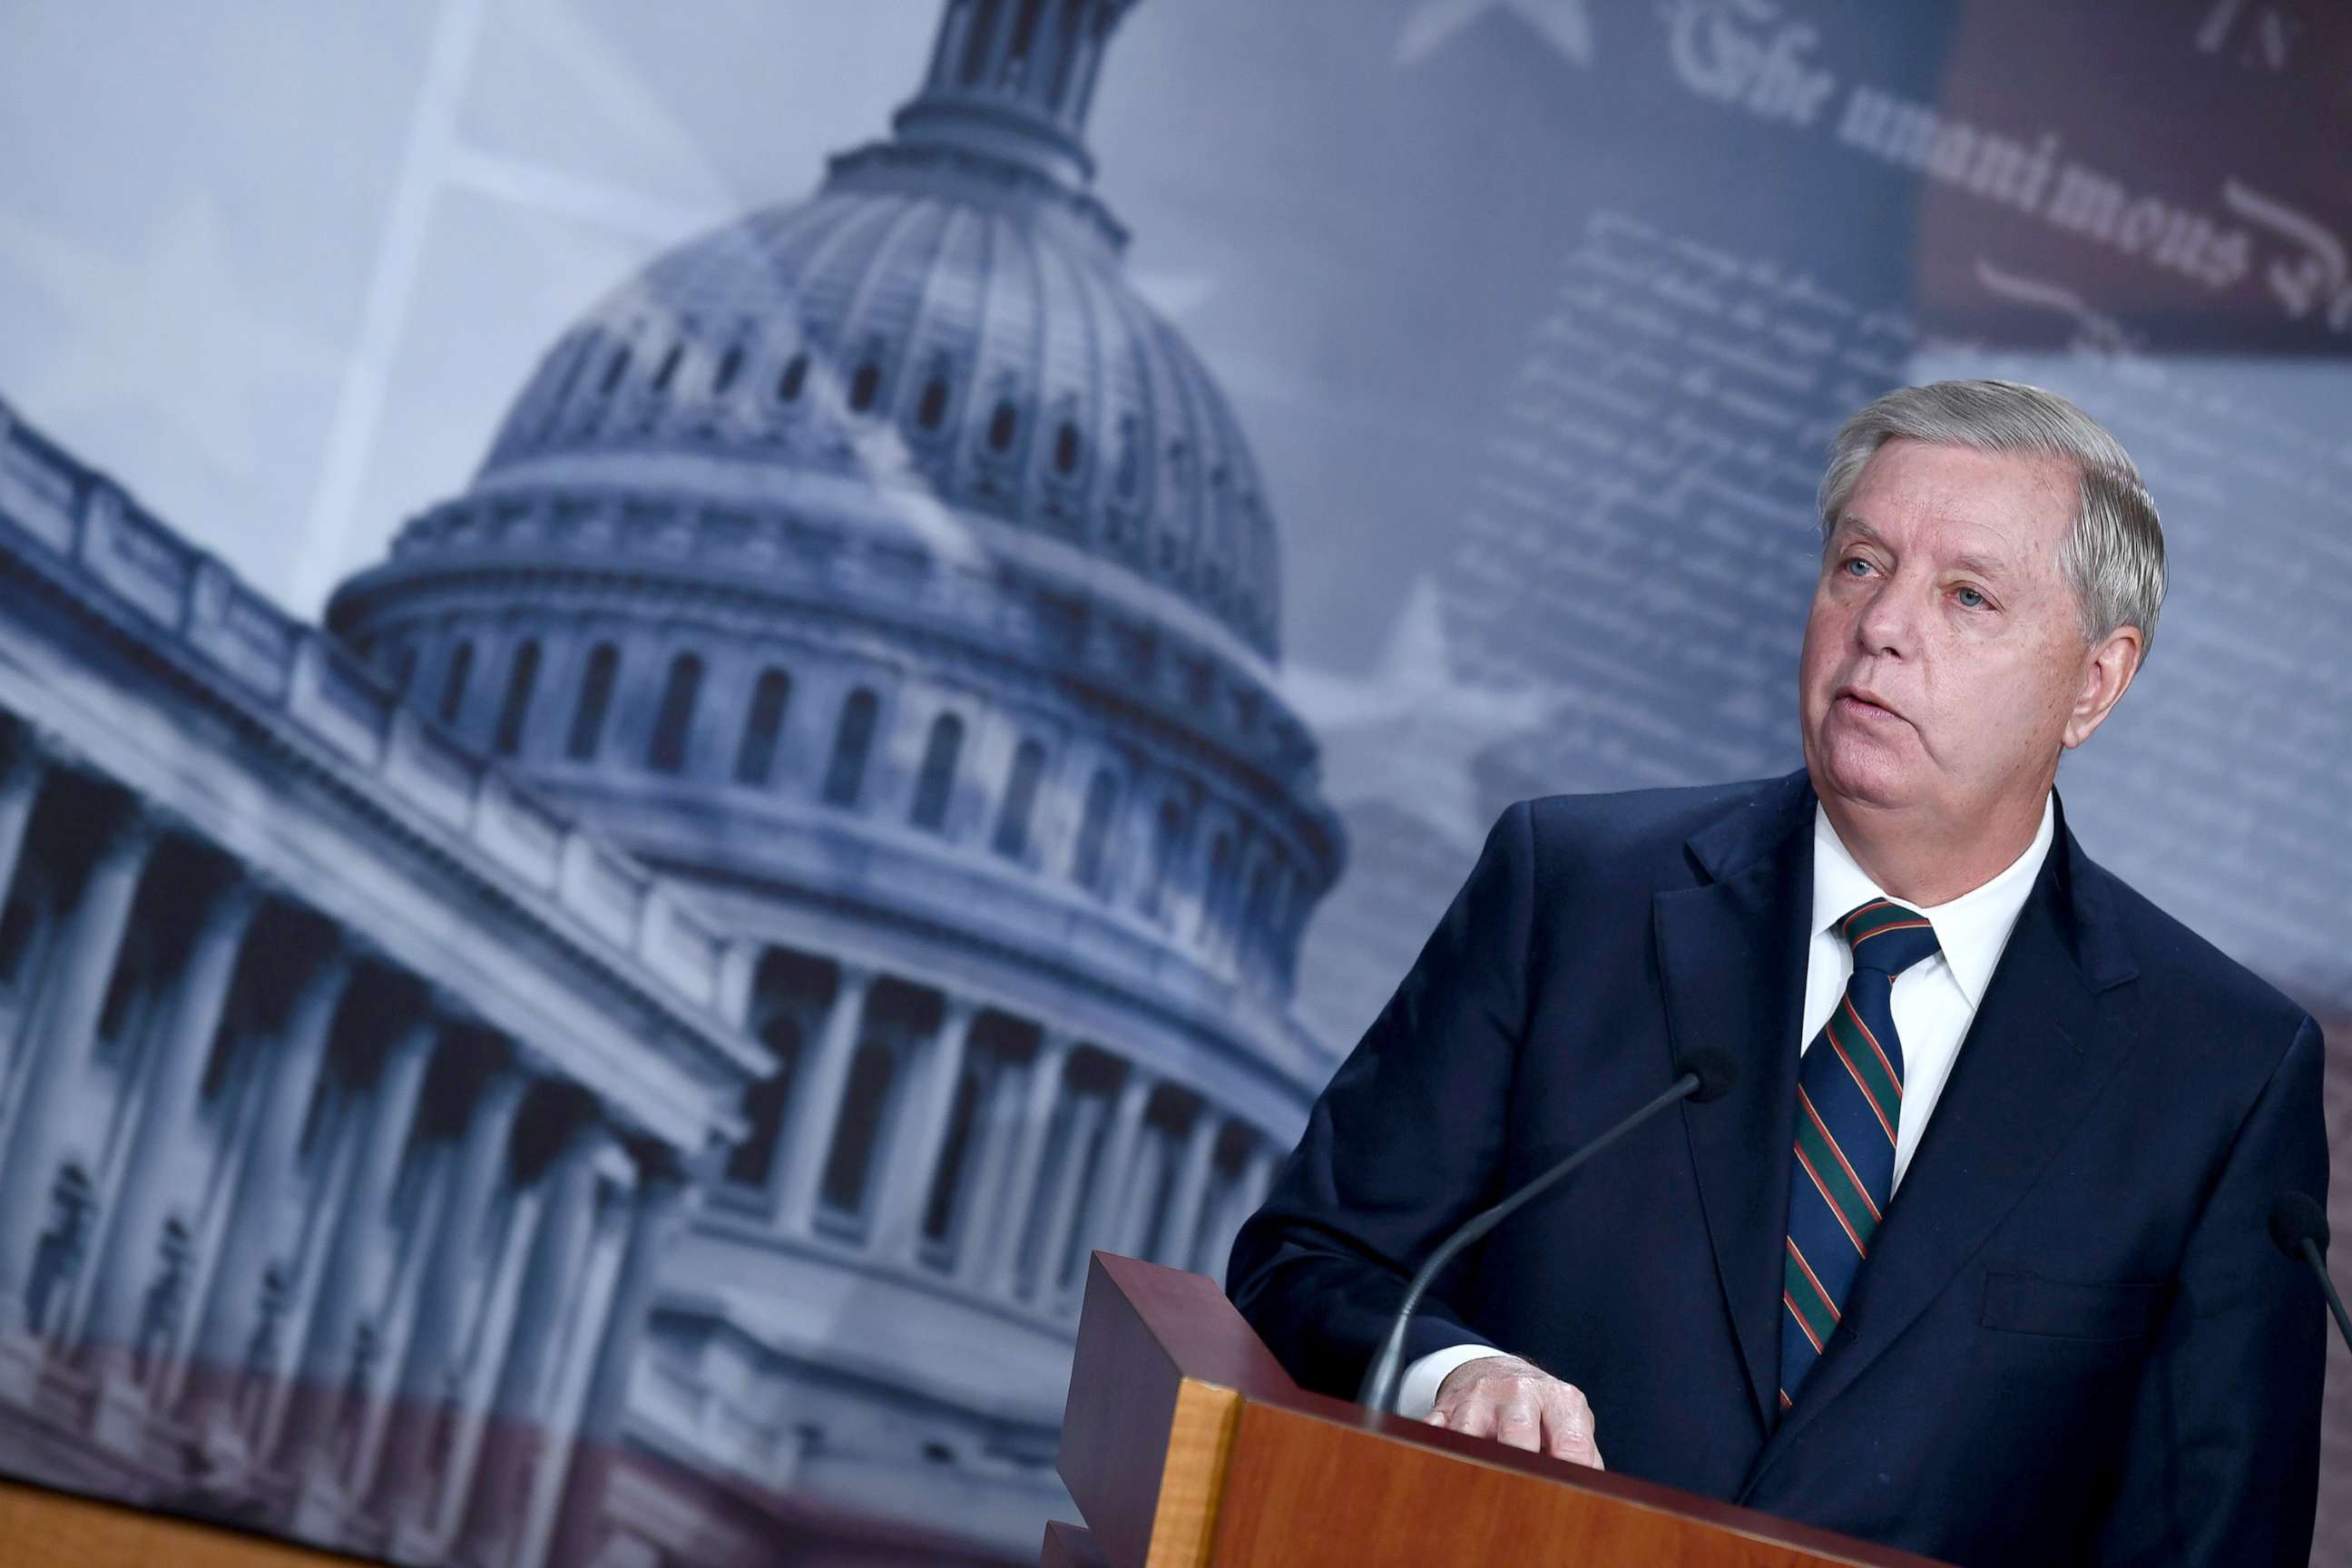 PHOTO: Sen. Lindsey Graham speaks during a news conference at the US Capitol on Jan. 7, 2021.